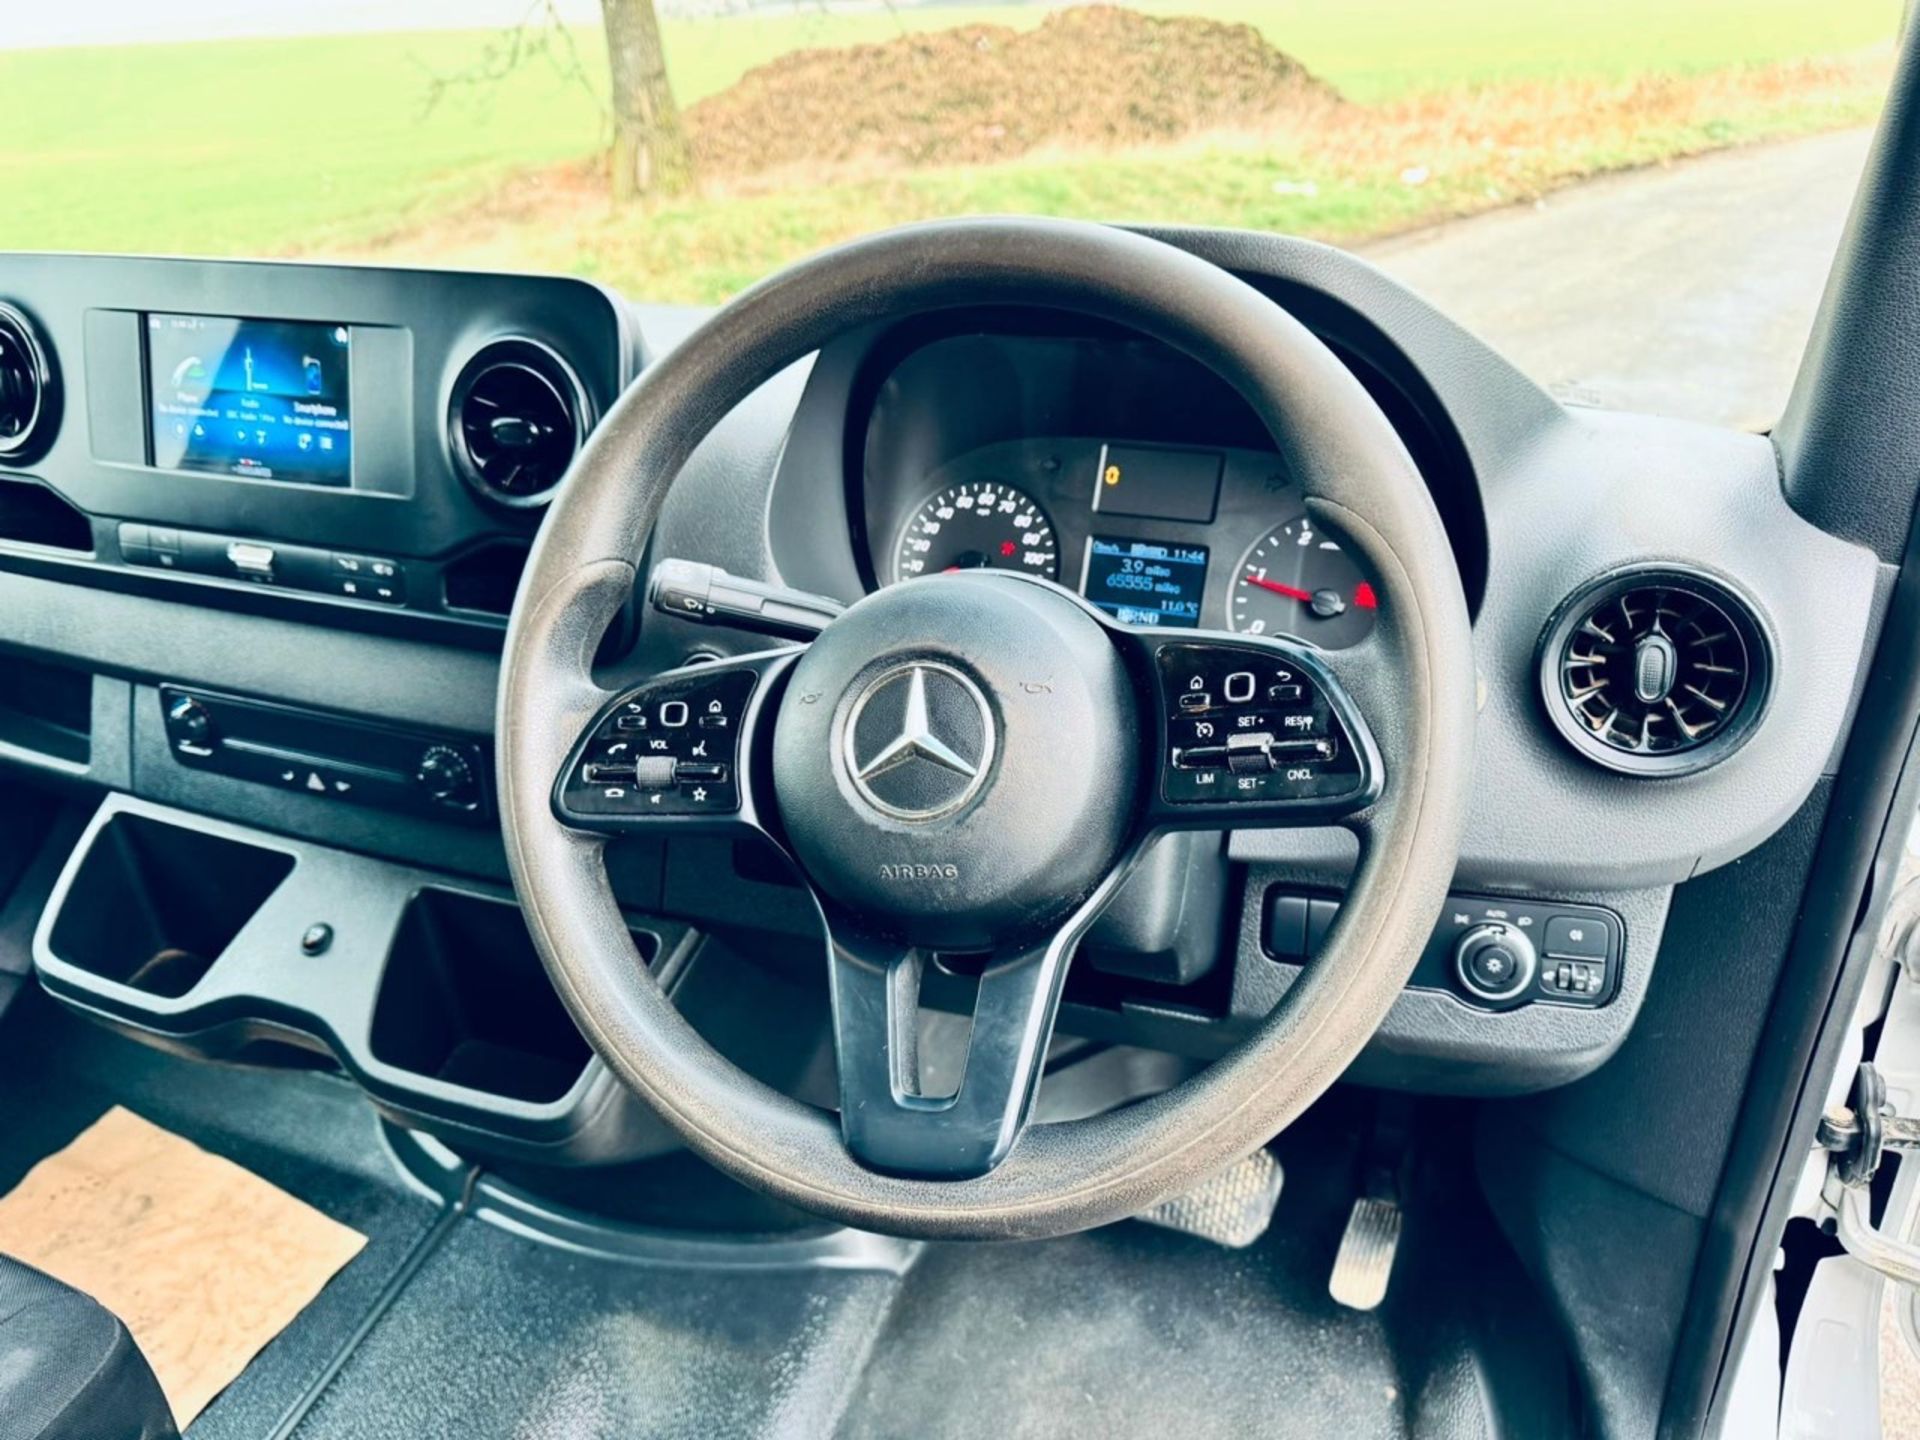 Mercedes-benz Sprinter 314CDI RWD Tipper *AUTOMATIC* (2020 20 Reg) 65k miles Only -1 Owner -SH Print - Image 12 of 19